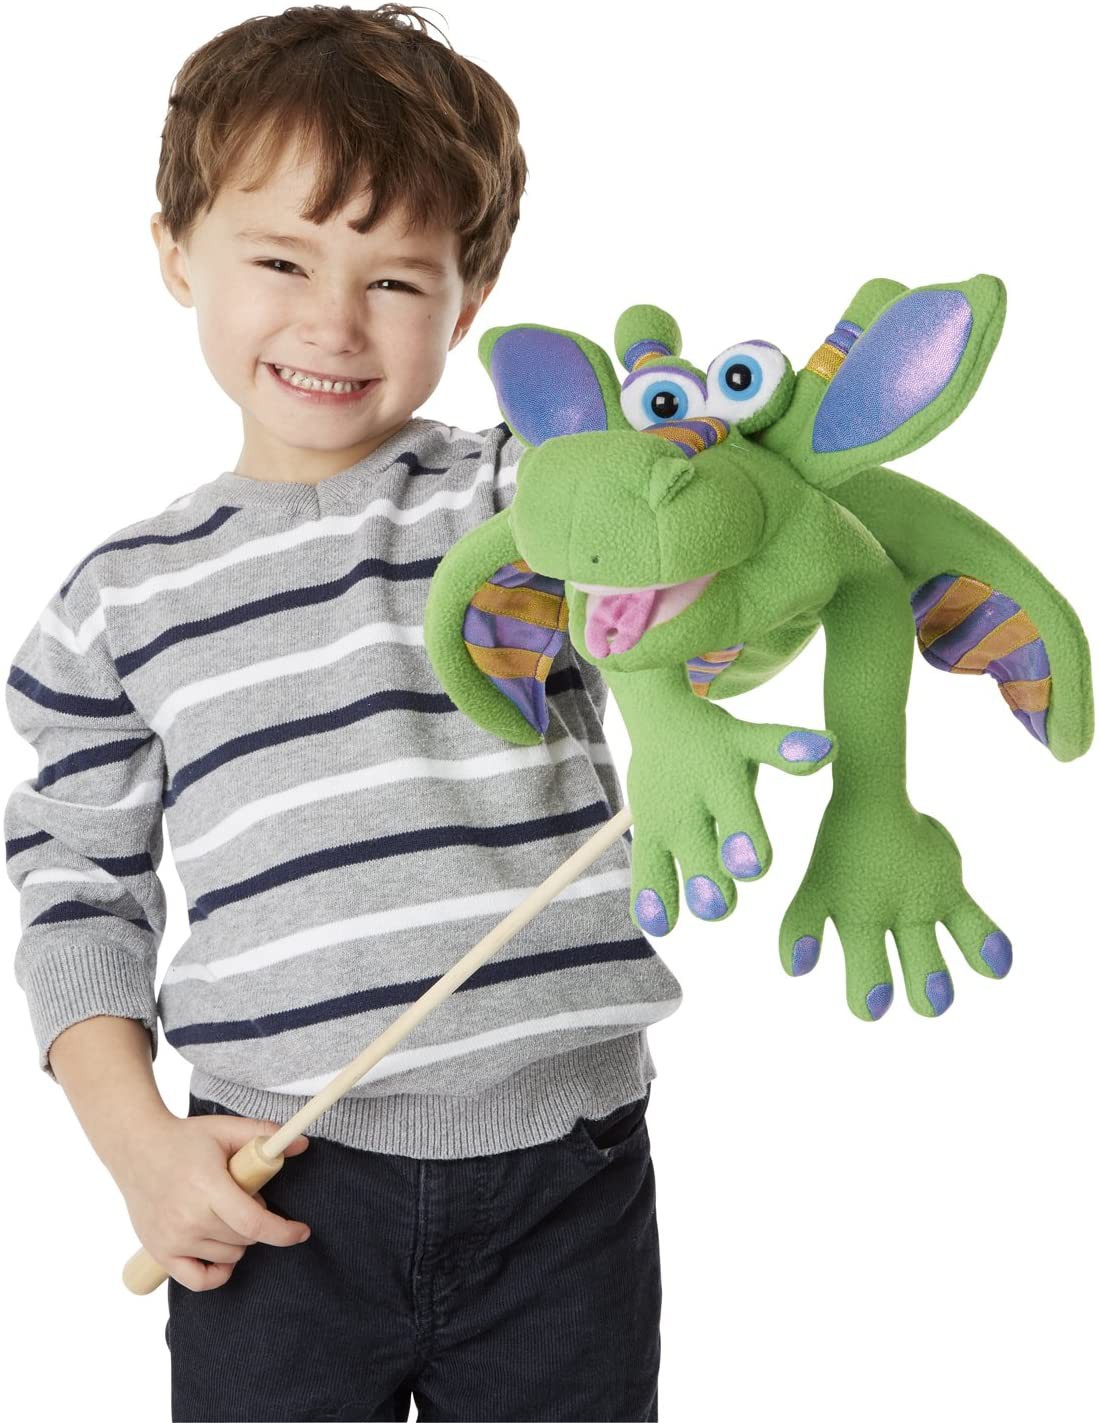 Dragon Puppet with Detachable Wooden Rod - Melissa and Doug